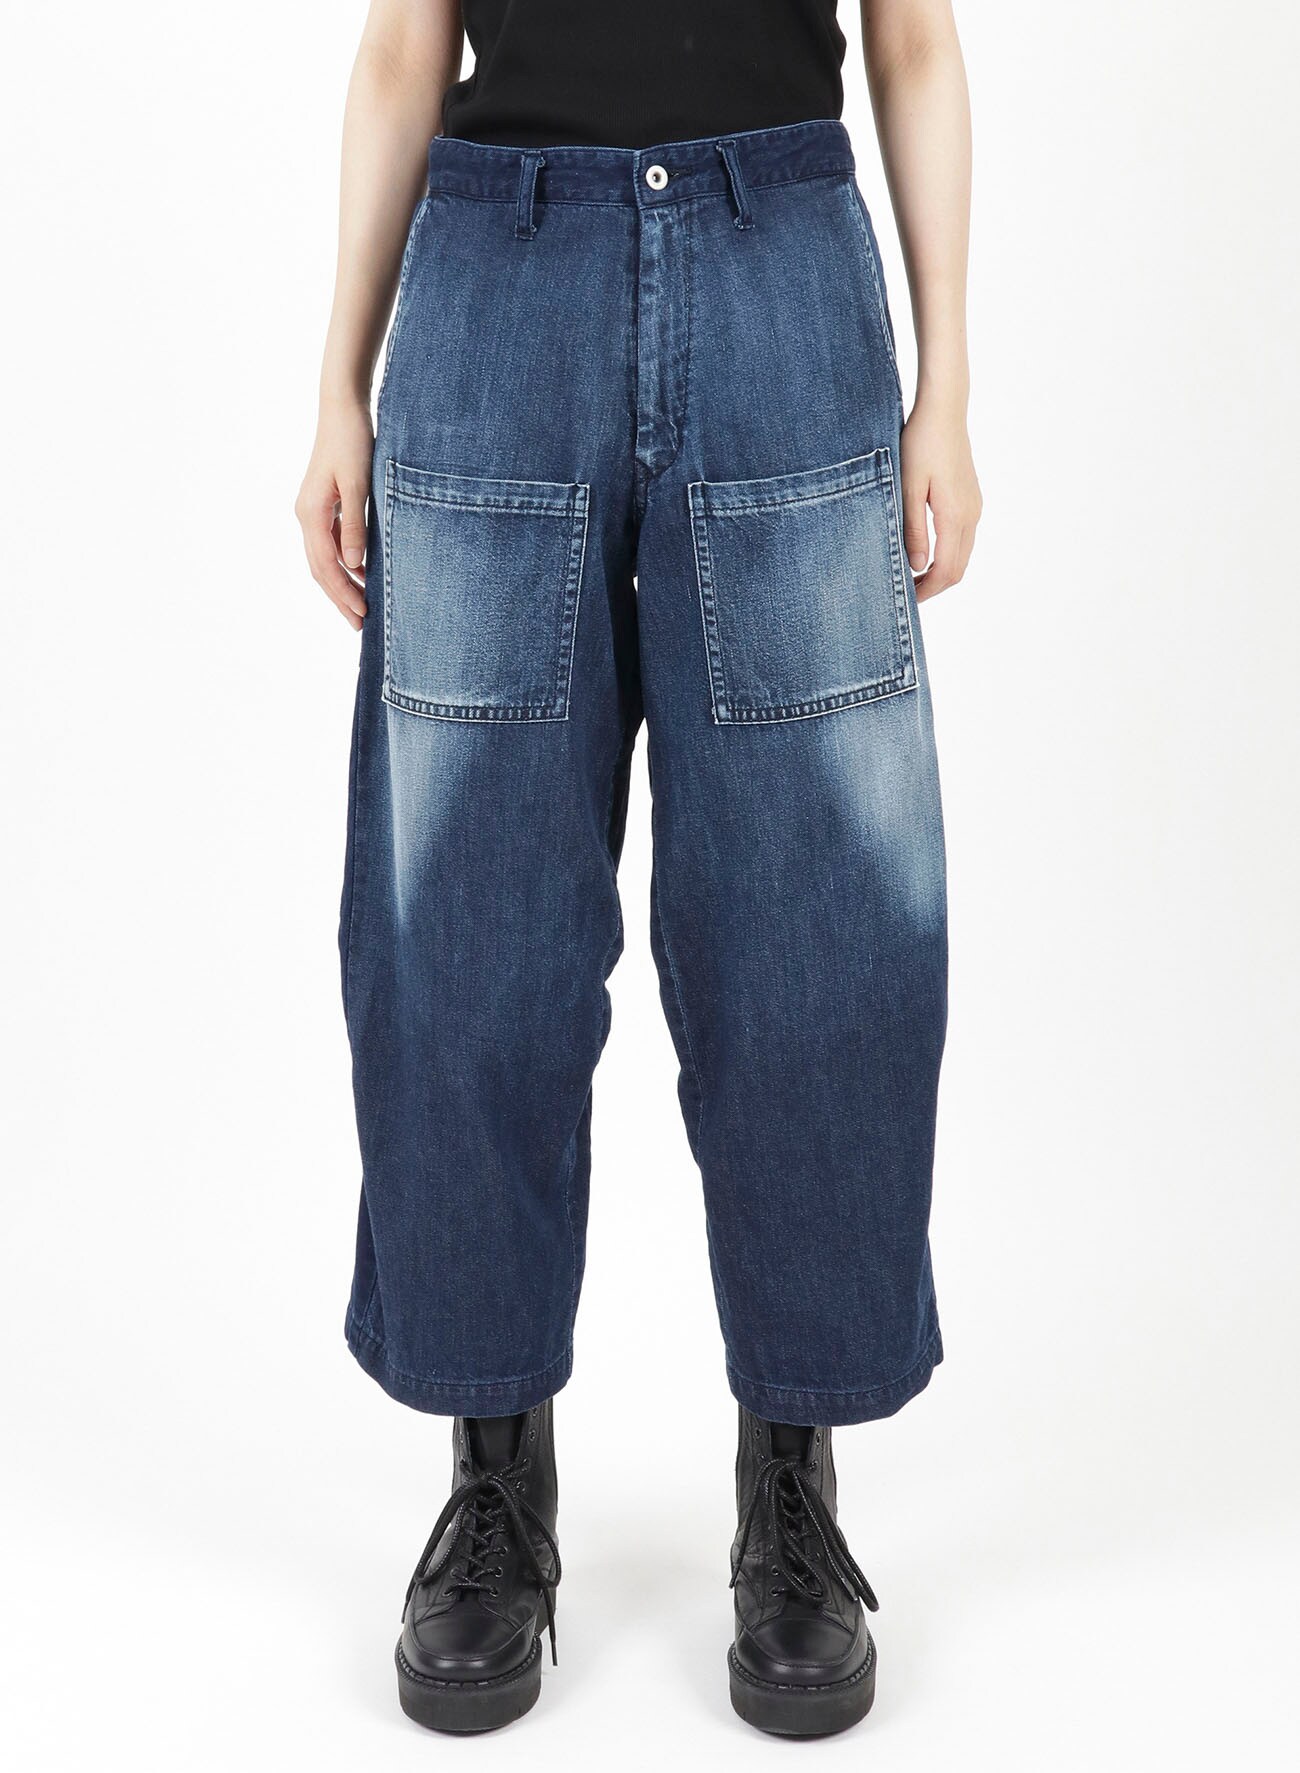 8oz SPOTTED DENIM BACK TWO TUCK PANTS